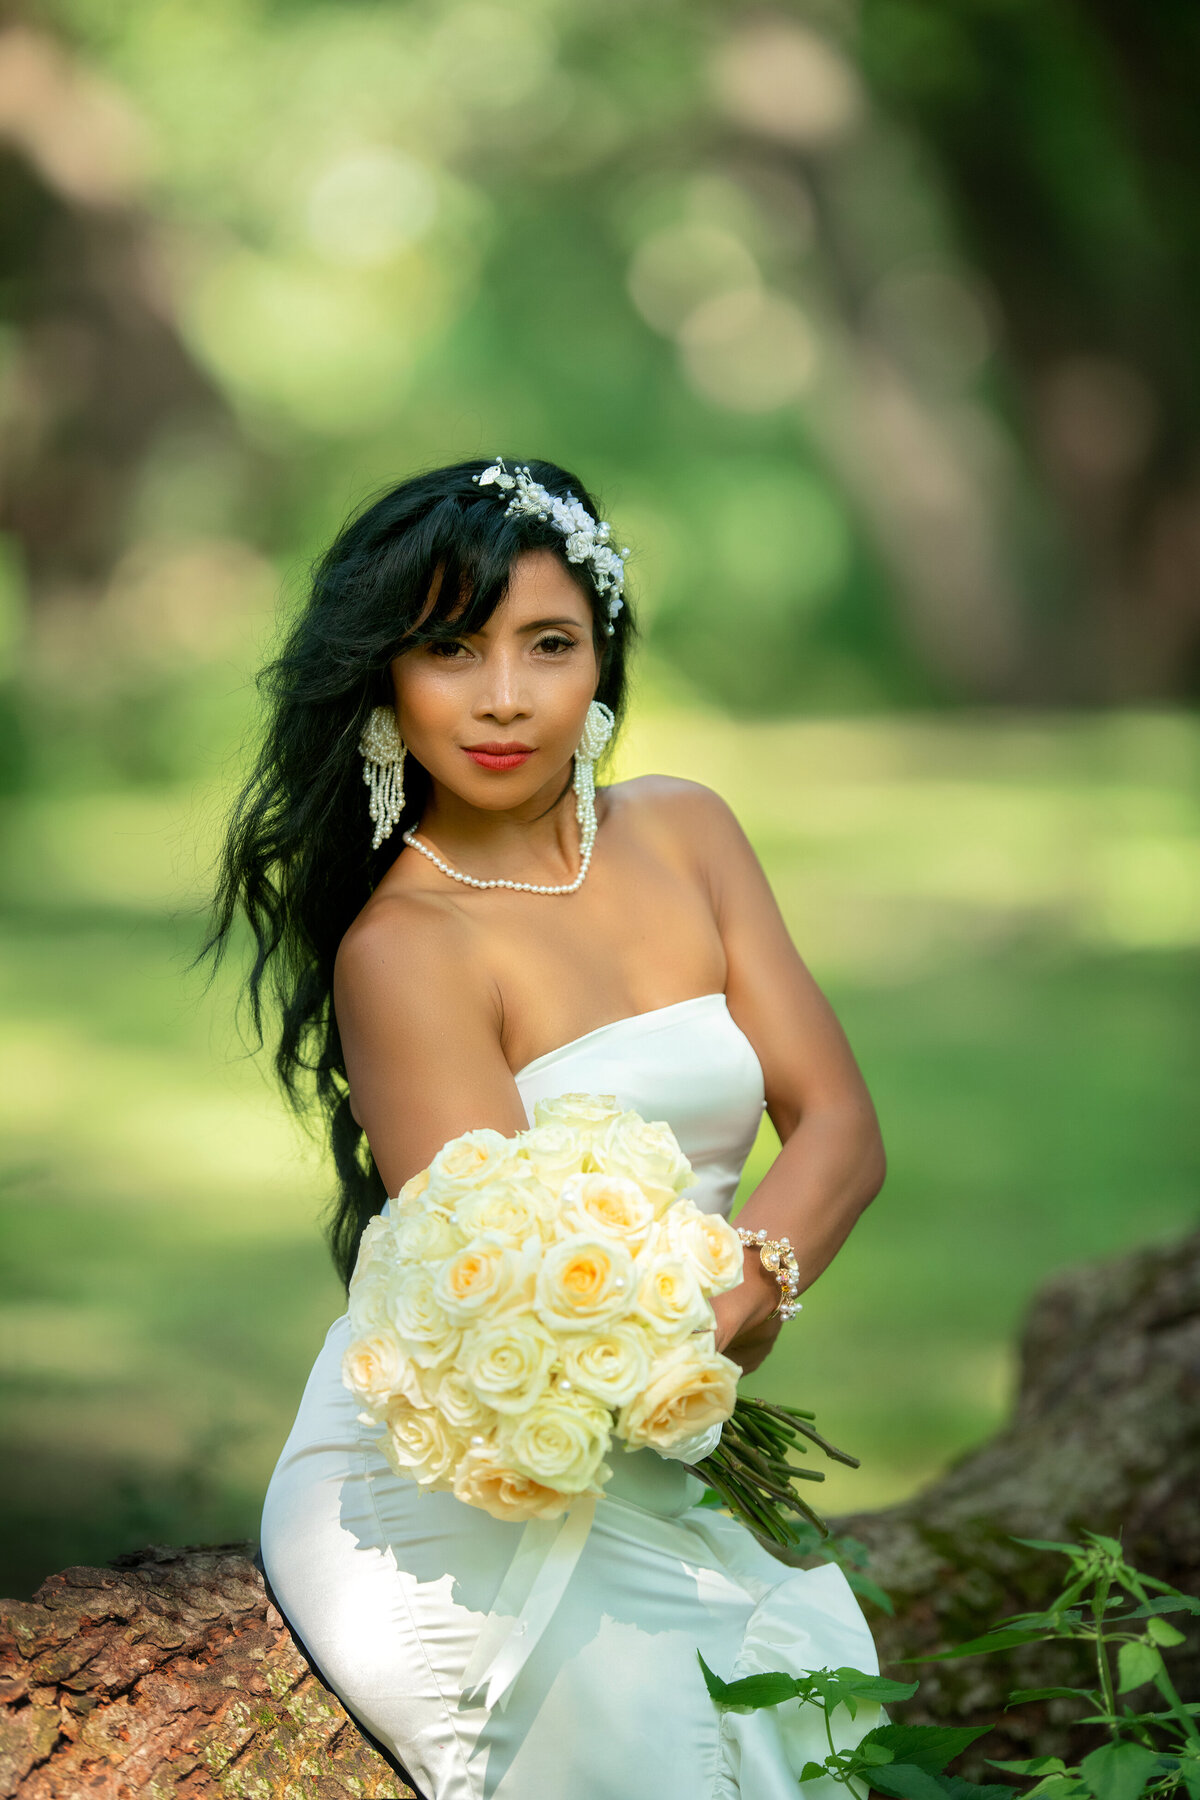 Portrait of bride in white dress with bouquet of white roses